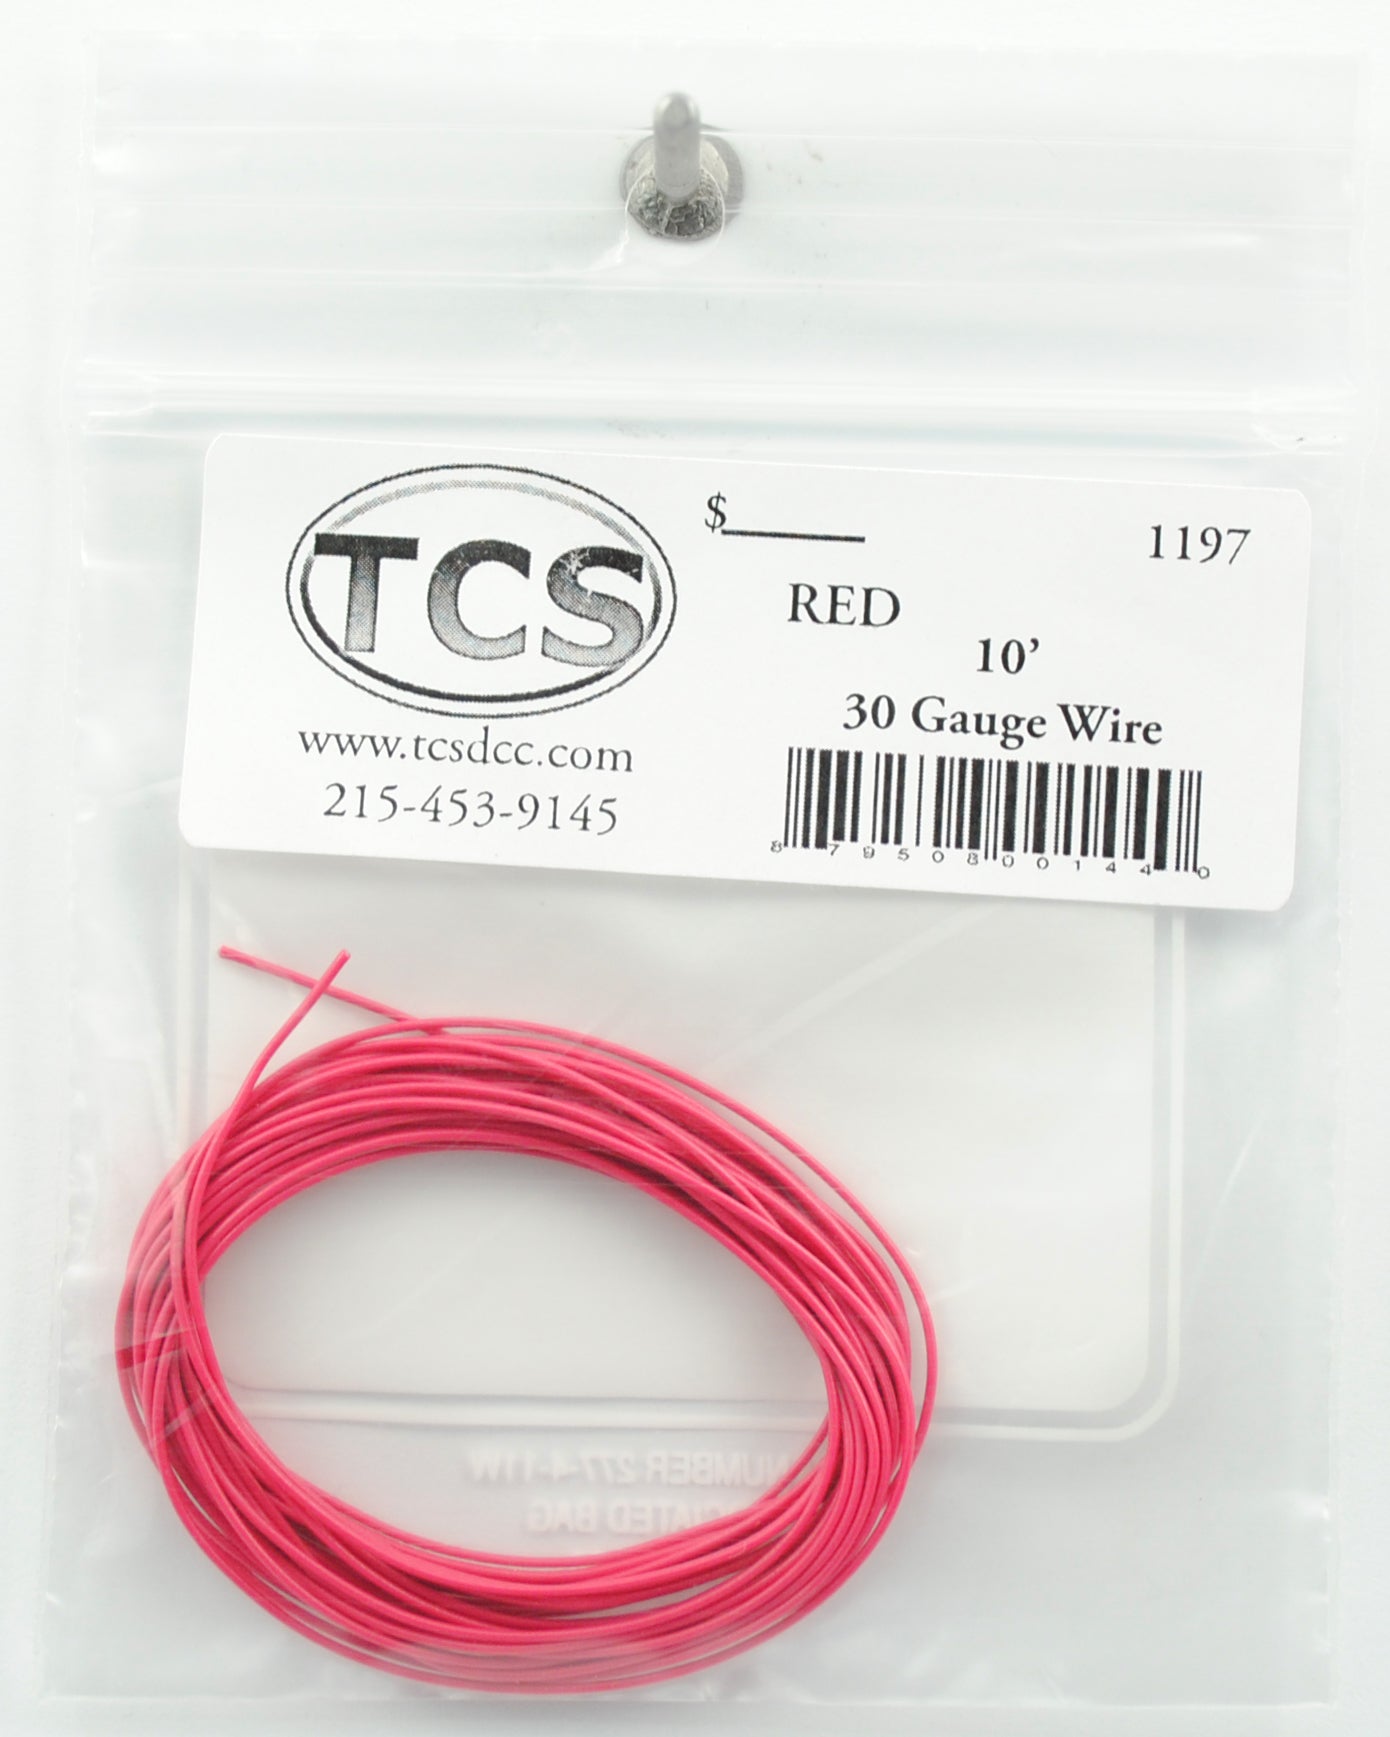 Train Control Systems 1197 10' of 30 Gauge Wire, Red